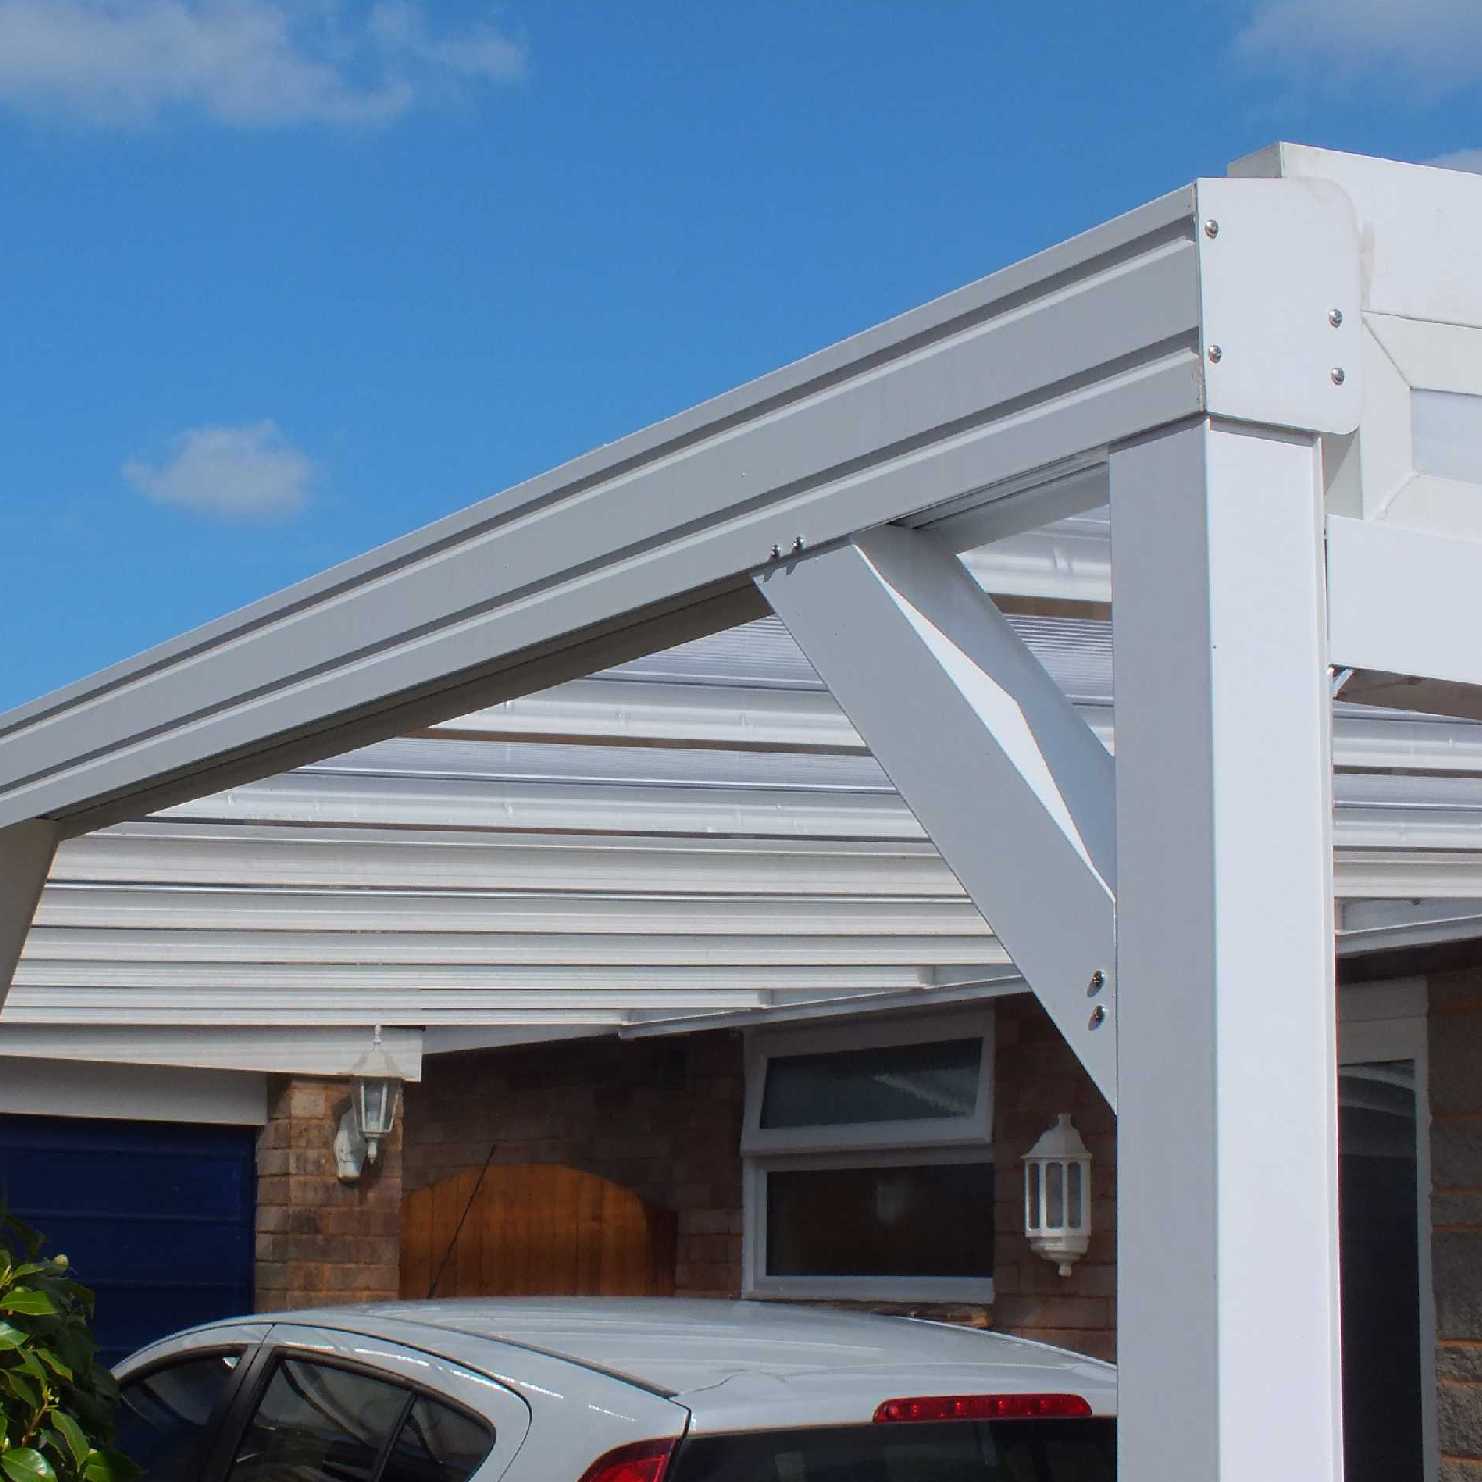 Buy Omega Smart Lean-To Canopy, White with 16mm Polycarbonate Glazing - 12.0m (W) x 4.0m (P), (5) Supporting Posts online today